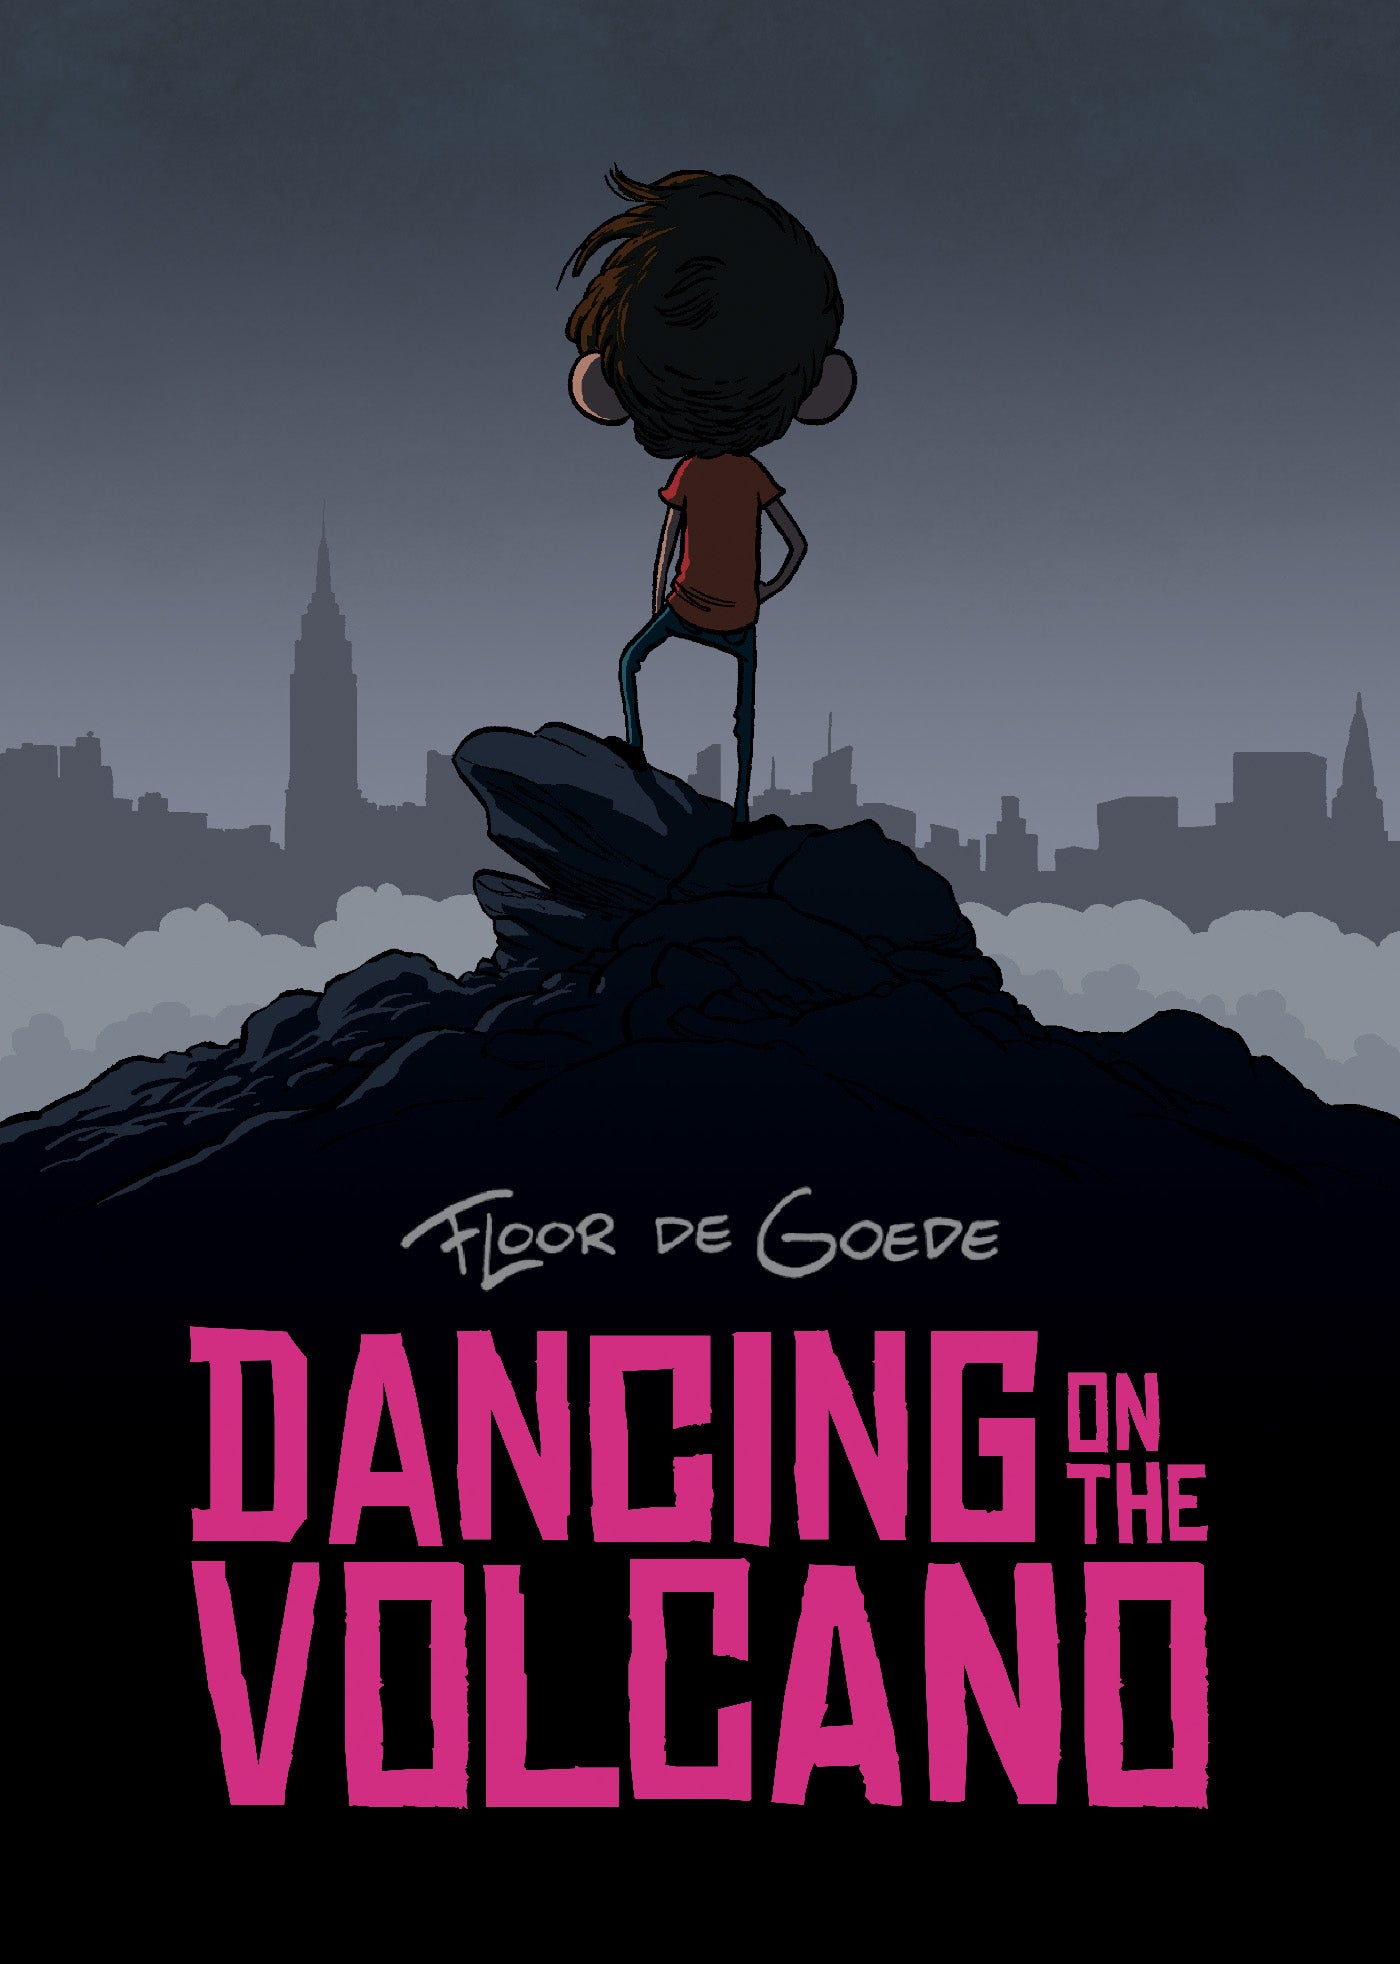 DANCING ON THE VOLCANO TRADE PAPERBACK